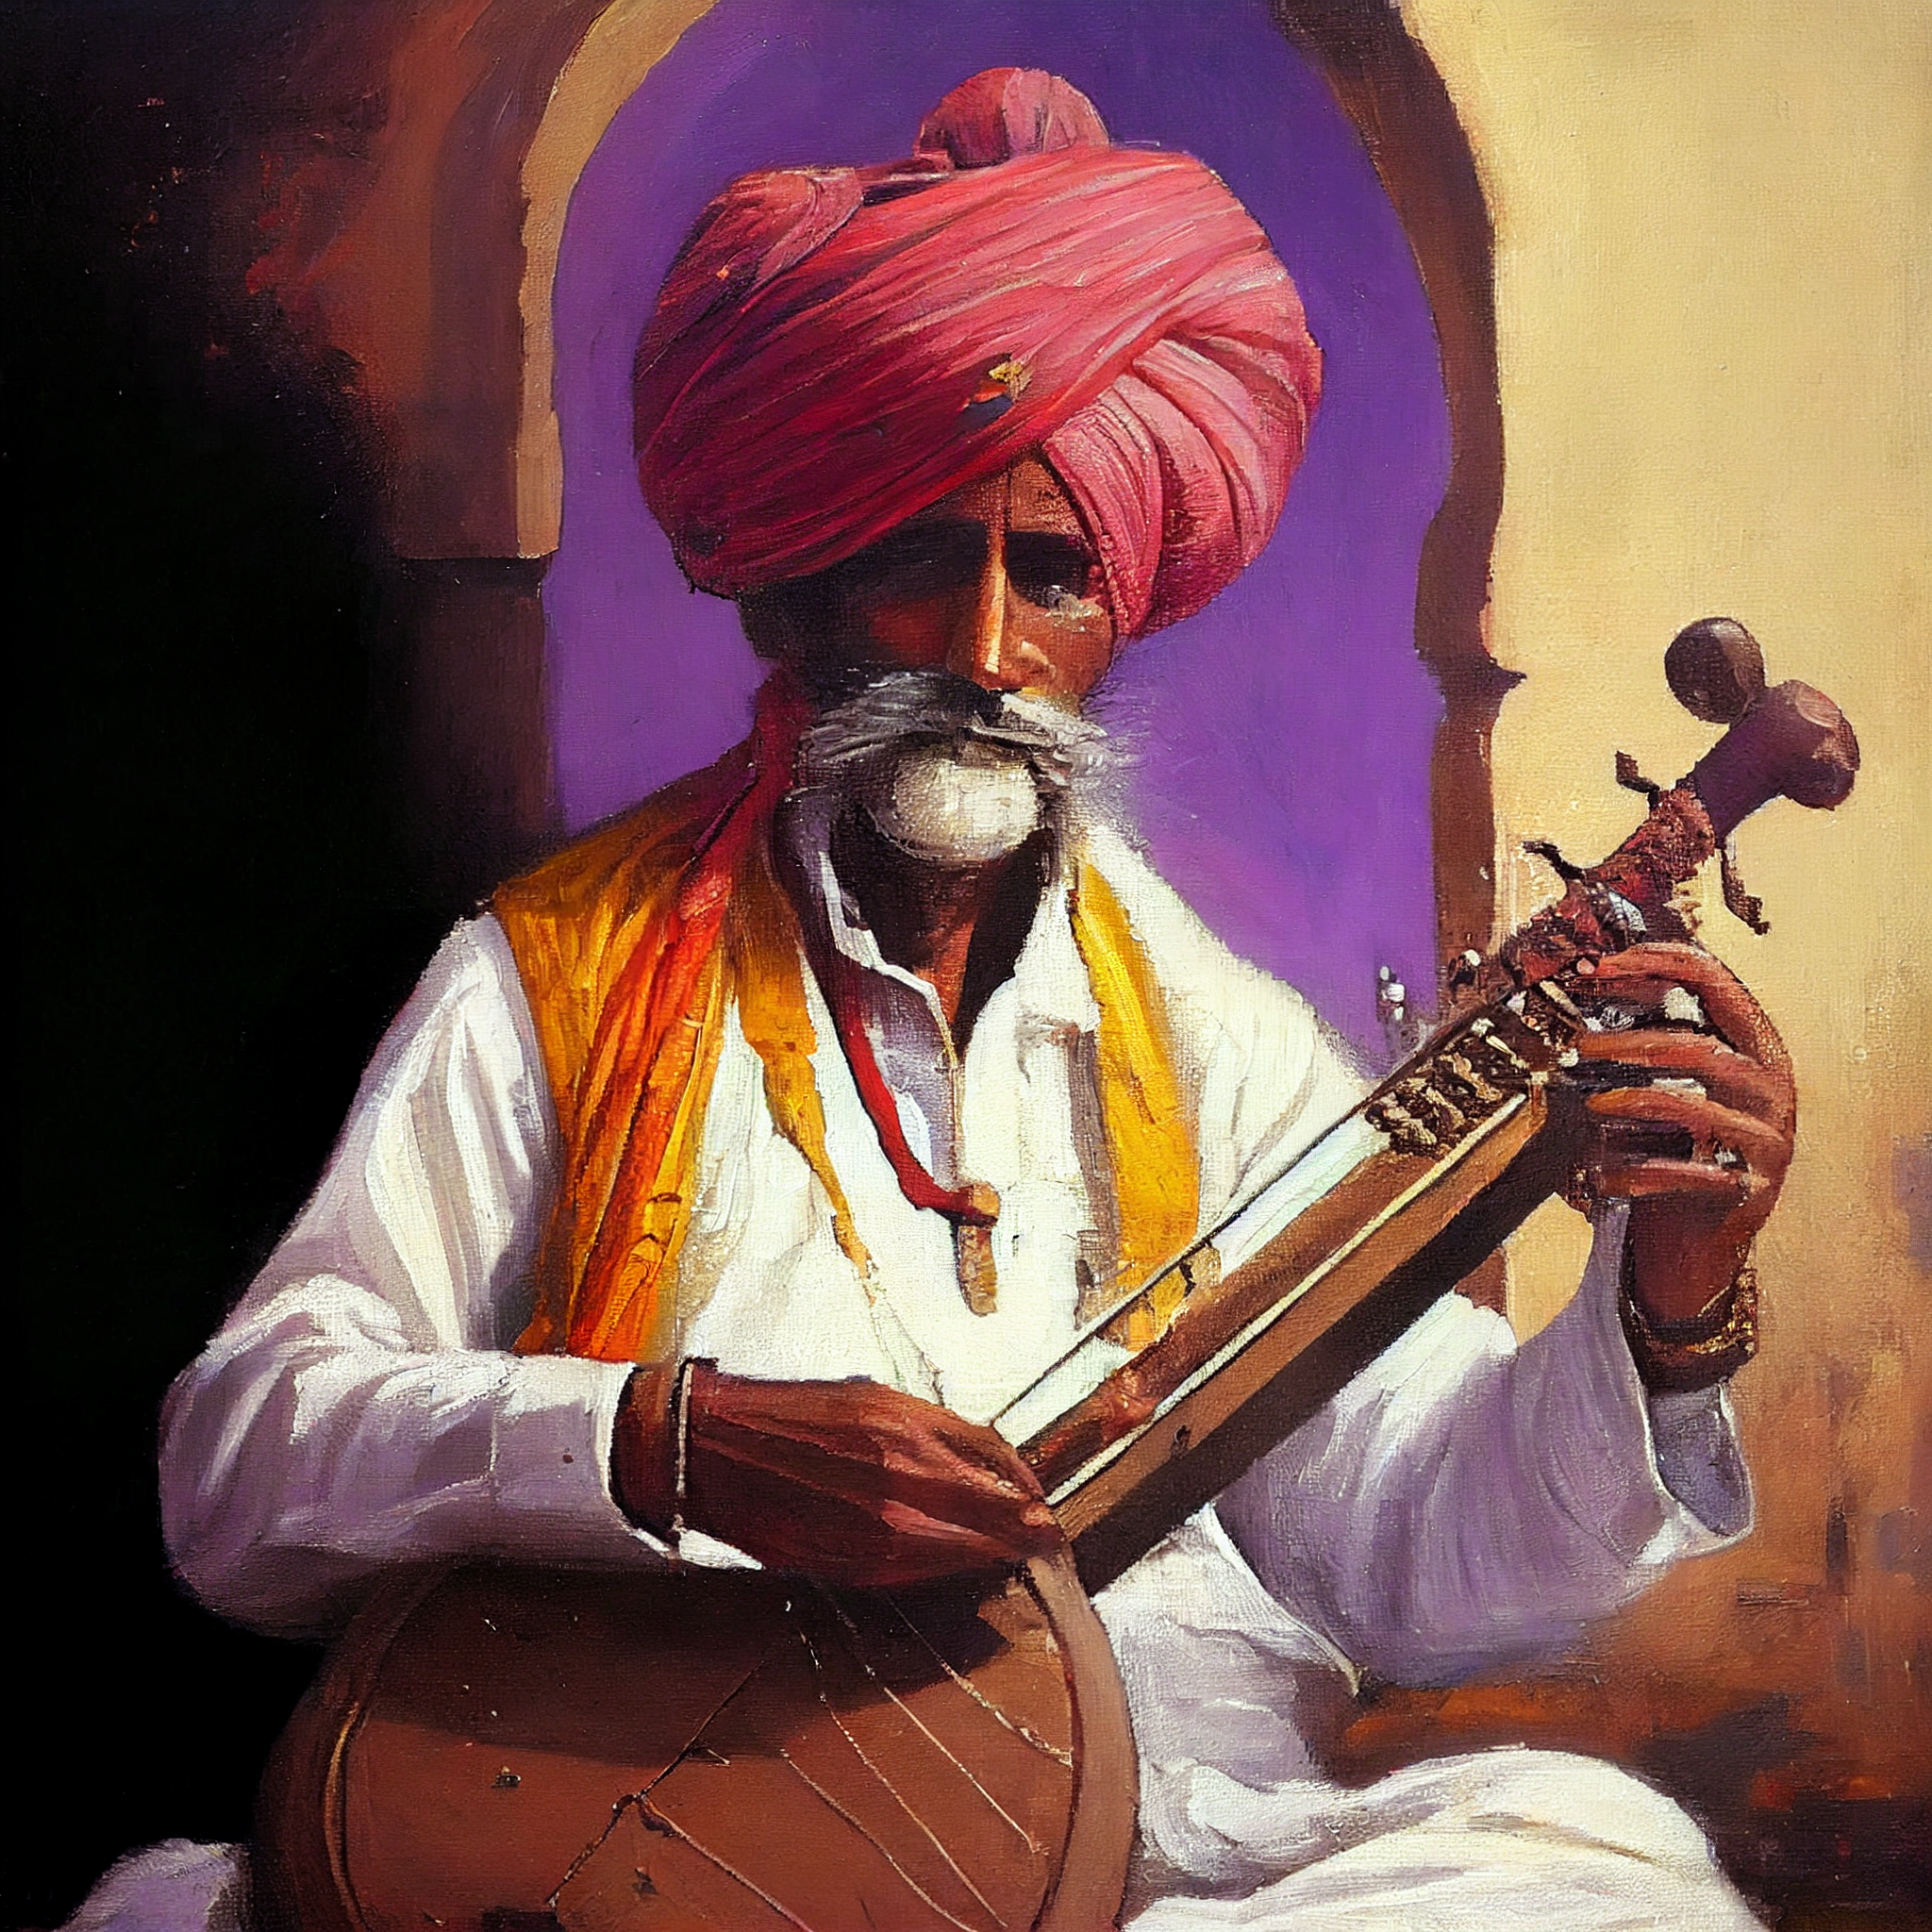 An Oil Color Portrait Print of a Rajasthani Turbaned Musician